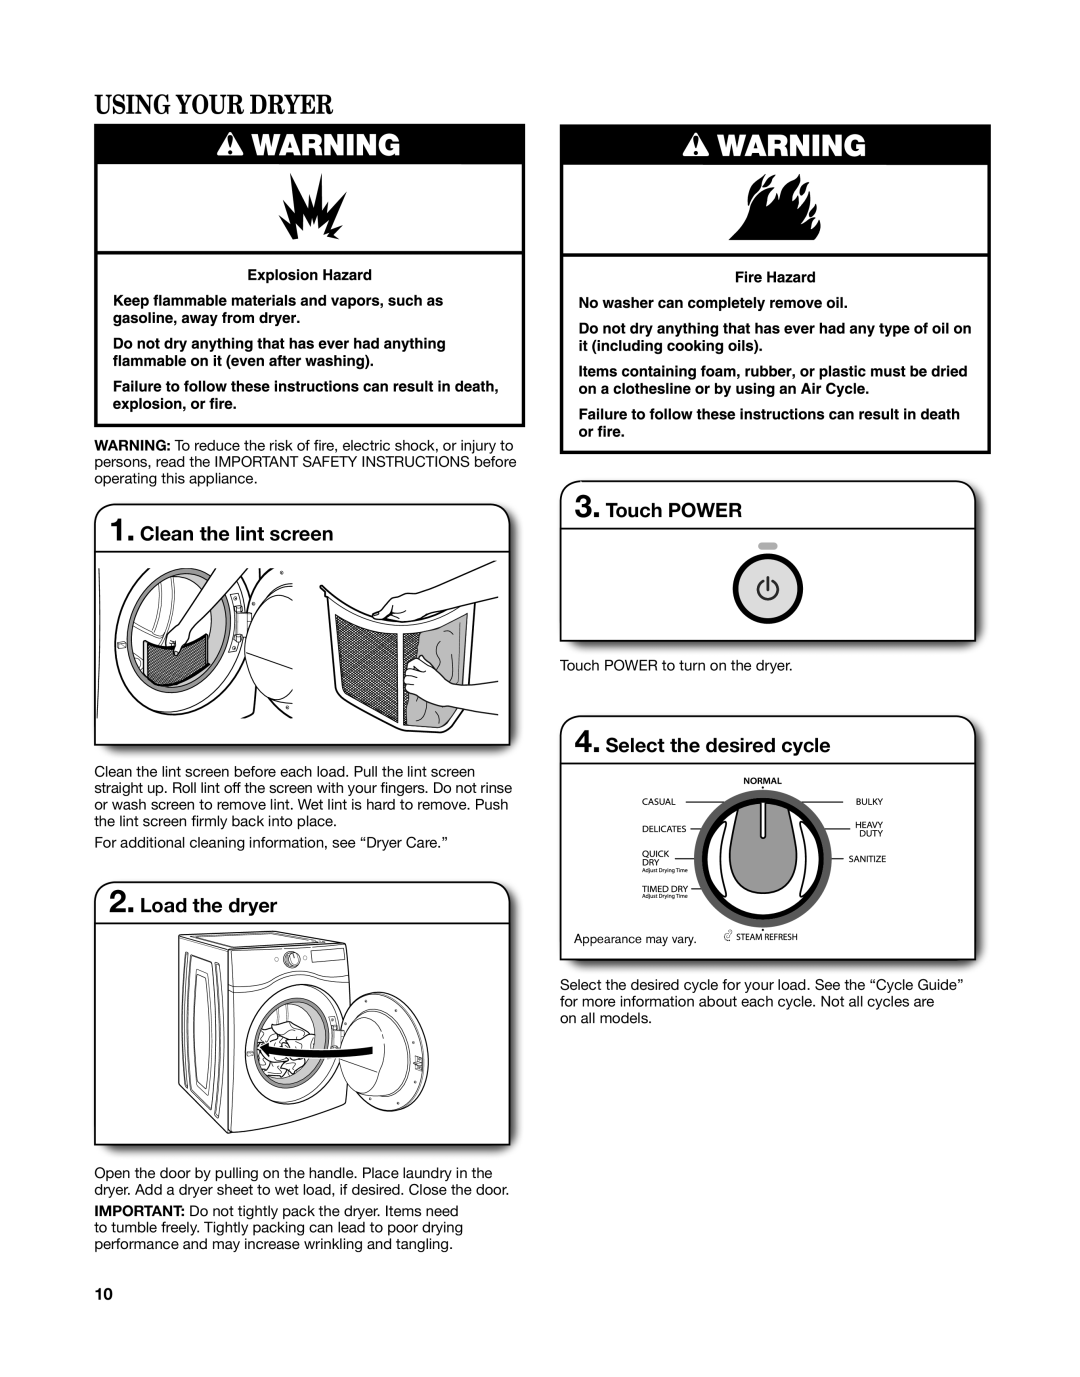 Whirlpool W10529643A - SP Using Your Dryer, Clean the lint screen, Load the dryer, Touch POWER, Select the desired cycle 